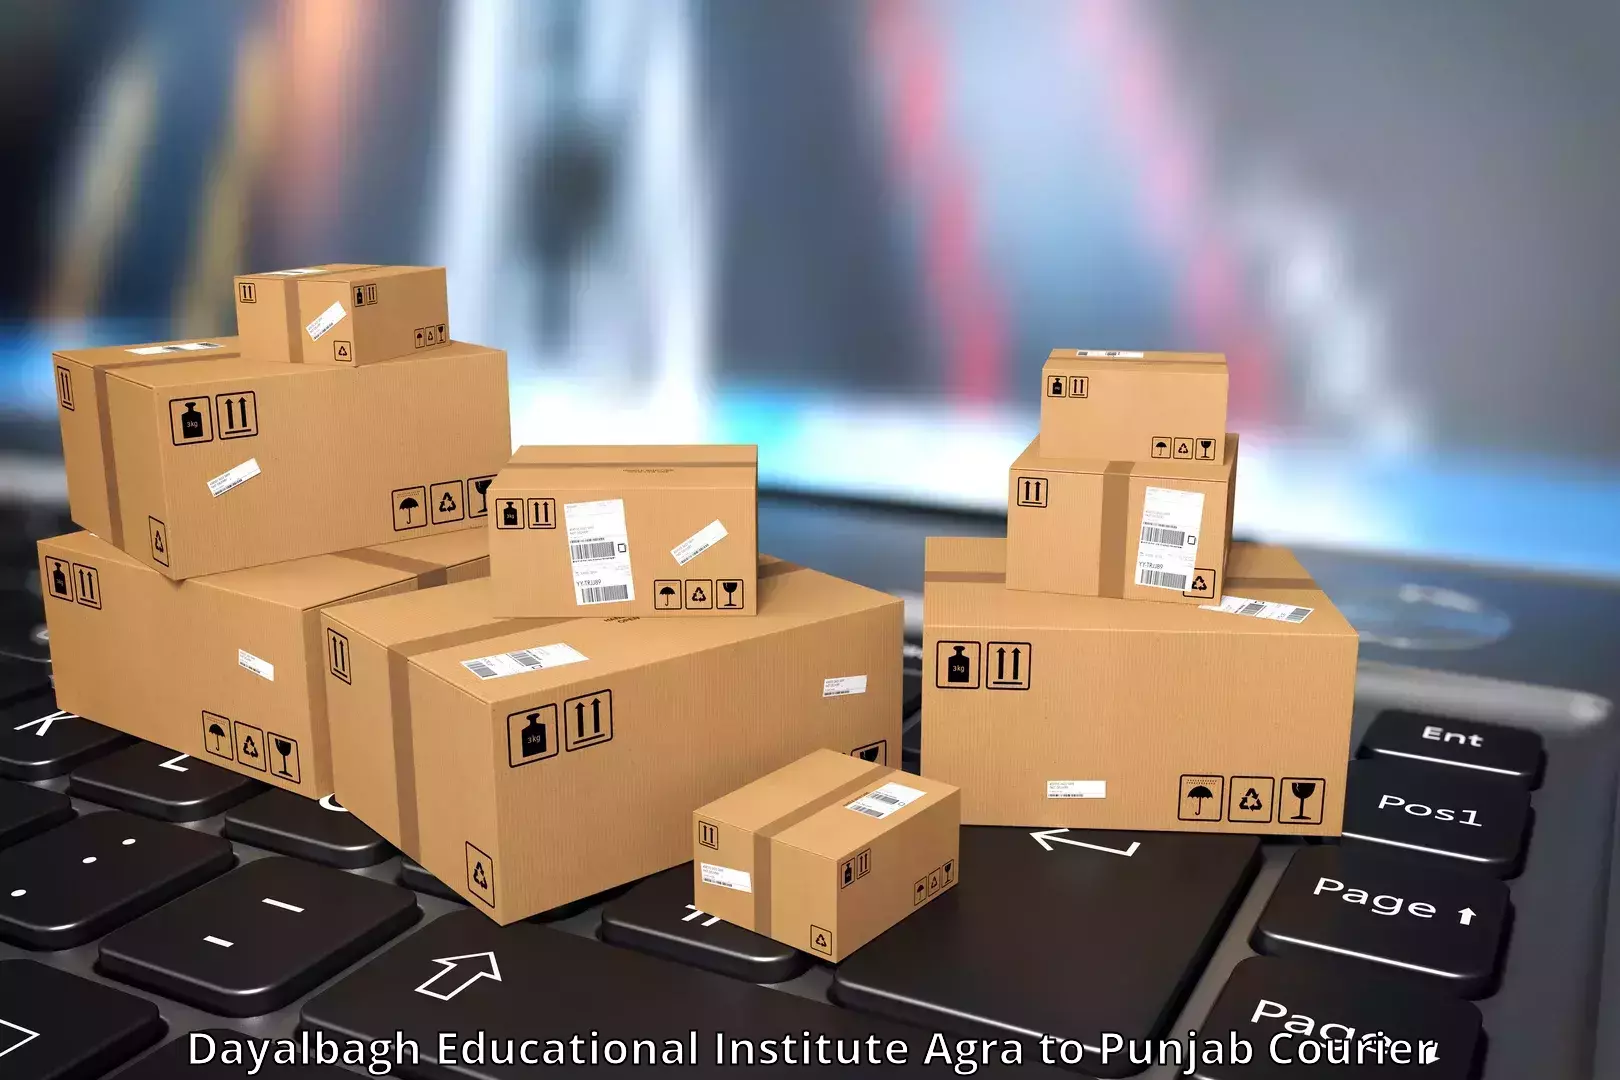 Efficient courier operations Dayalbagh Educational Institute Agra to Zirakpur